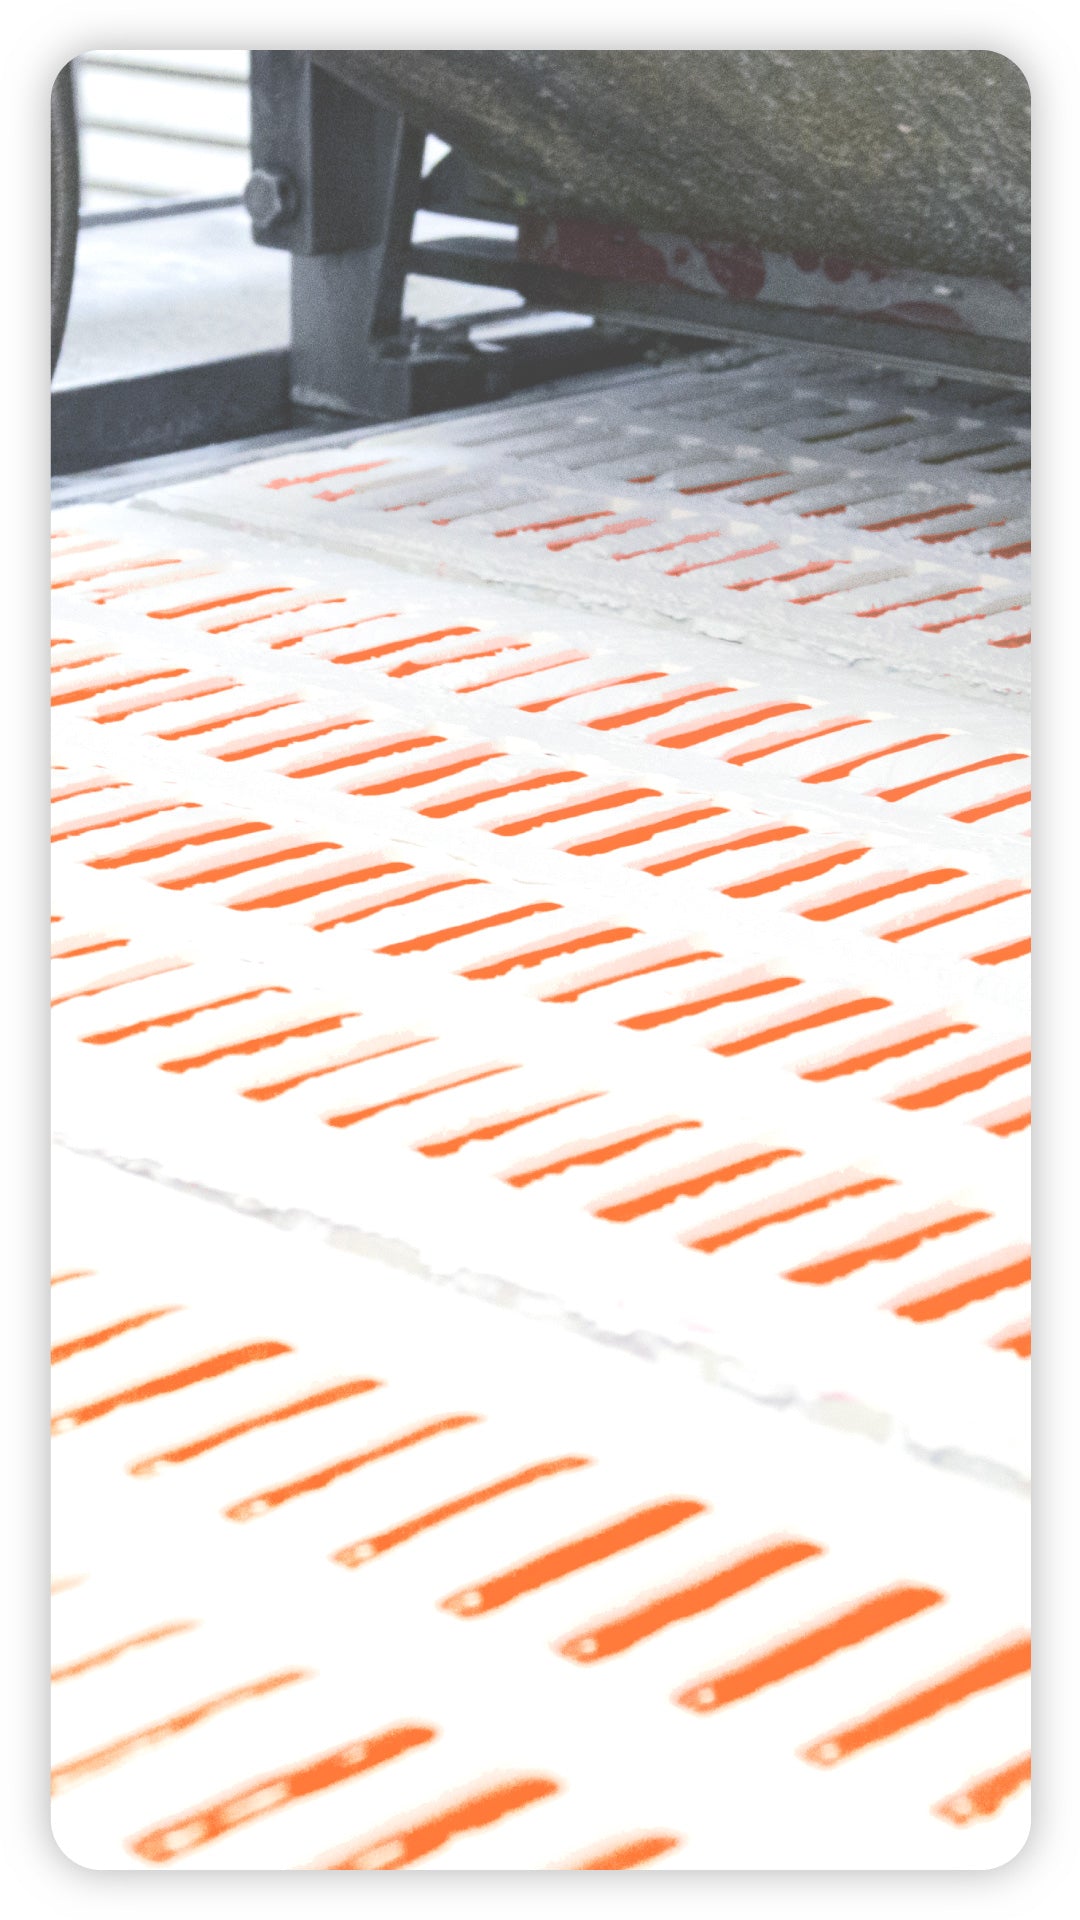 Starch Trays with Orange Sticks being made - Contract Manufacturing by Sweet Candy Company